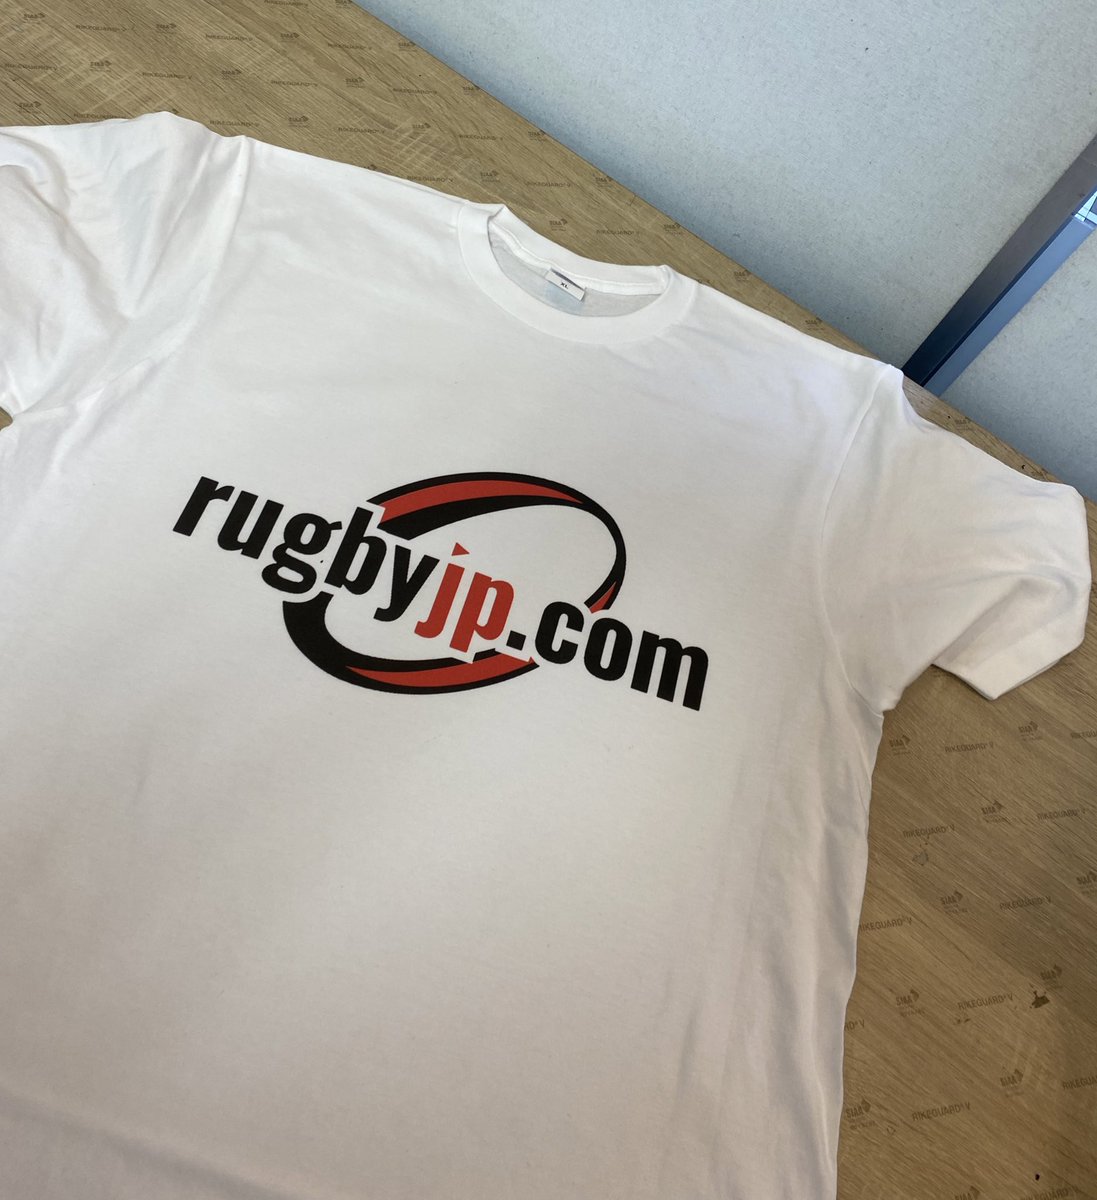 🏉RugbyJP.com merch is in the works! @rugbyjp #rugbyjp